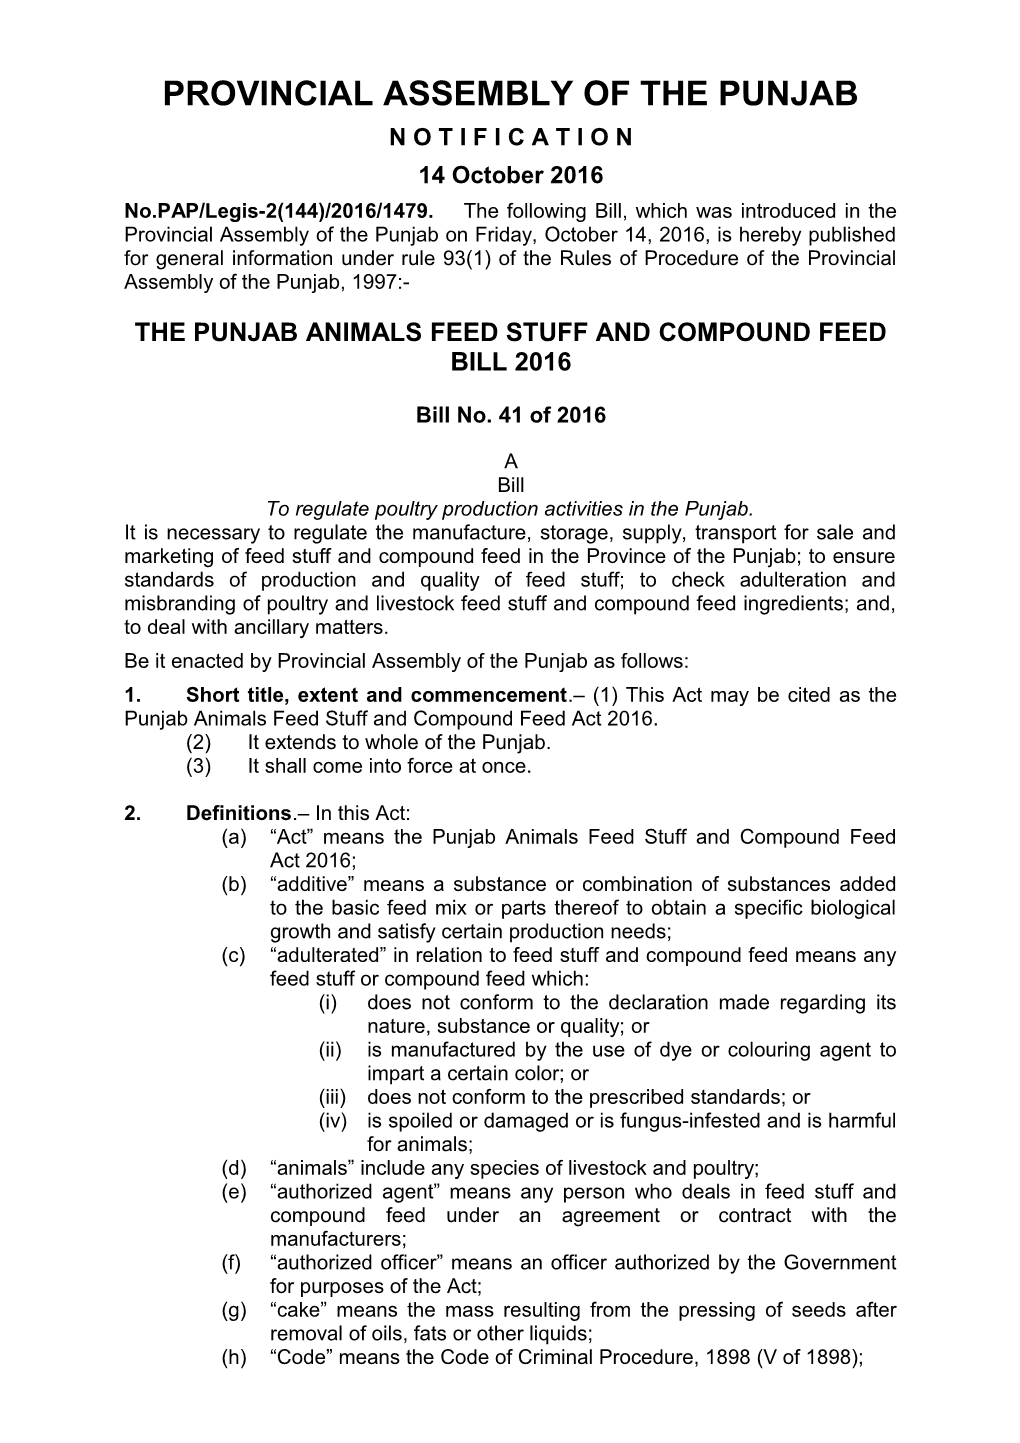 Vetted Punjab Animals Feed Stuff and Compound Feed Bill